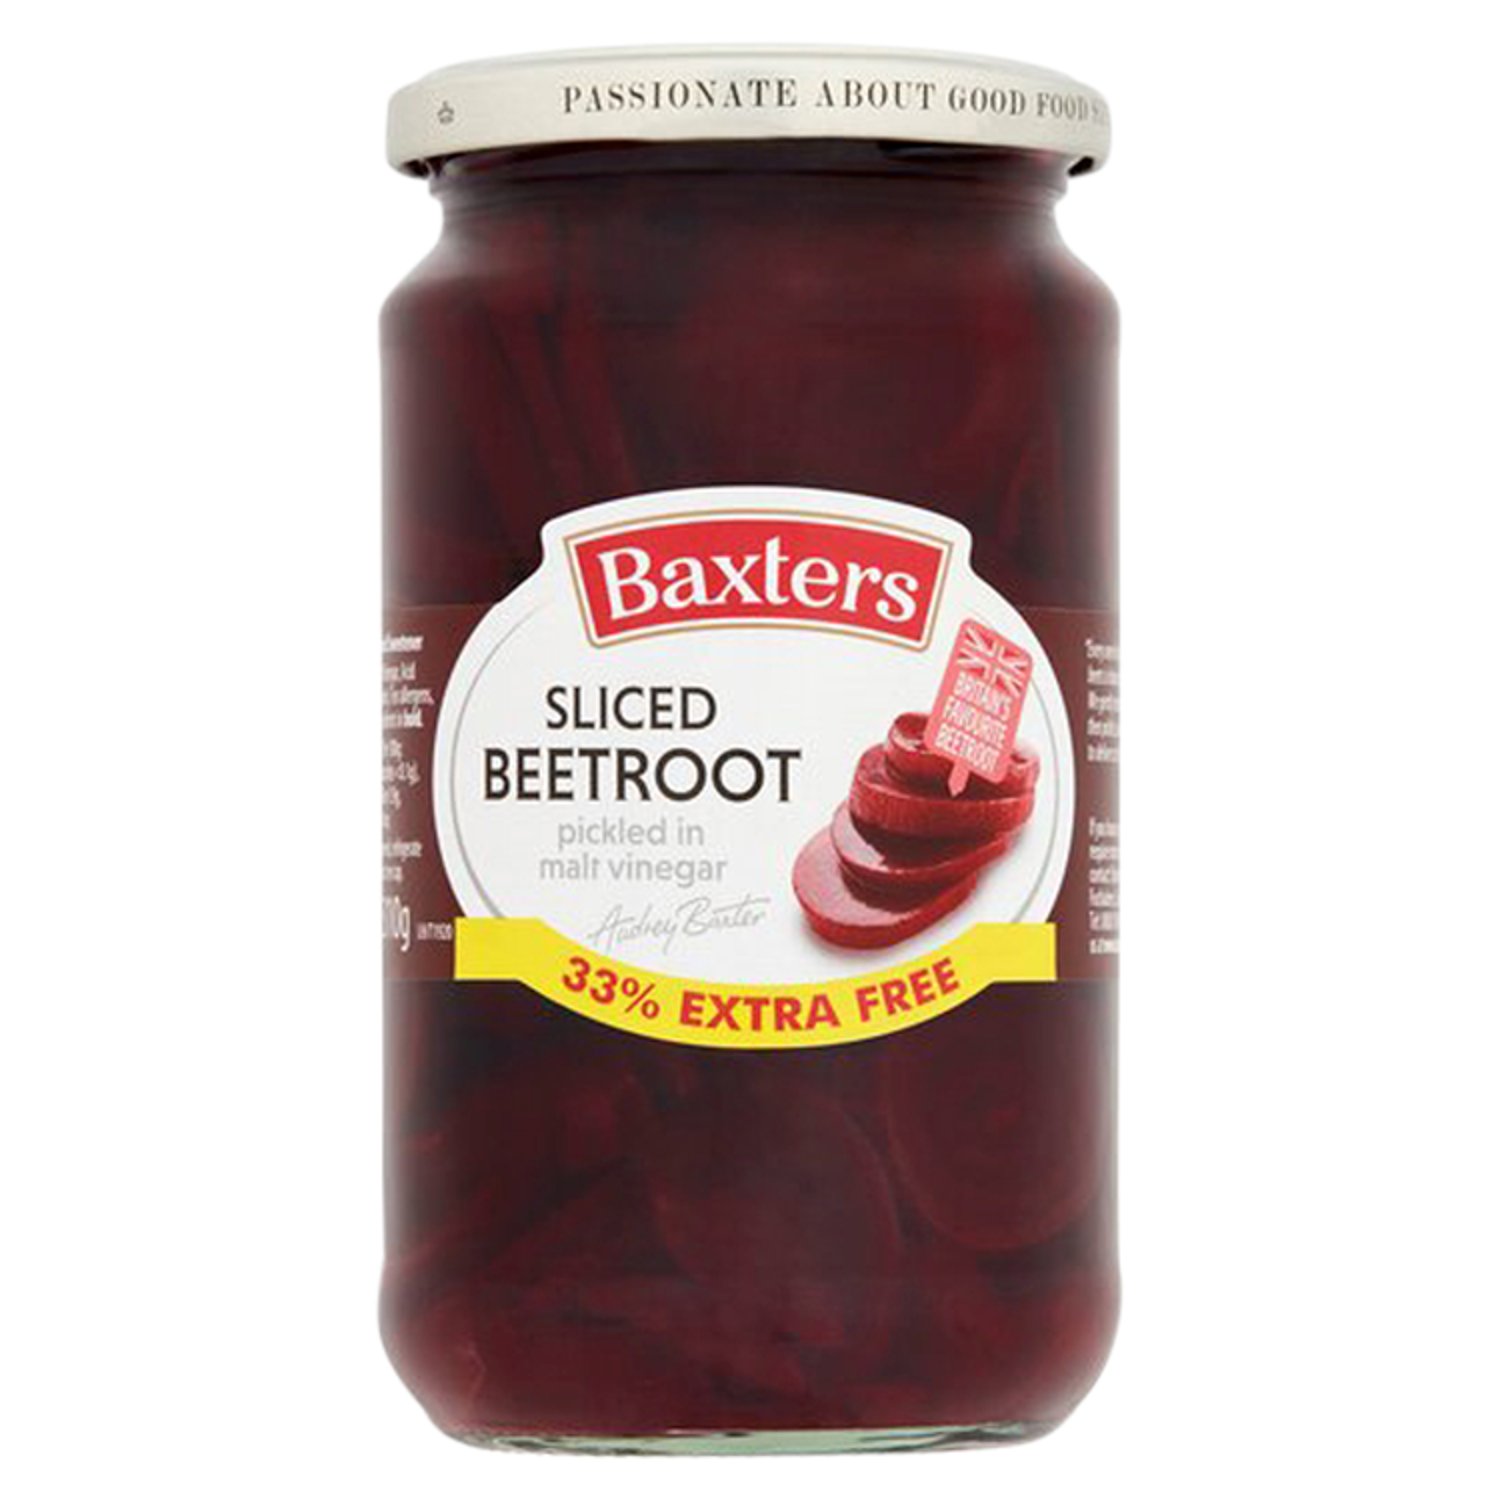 Baxters Sliced Beetroot 33% Extra Free (340 g)